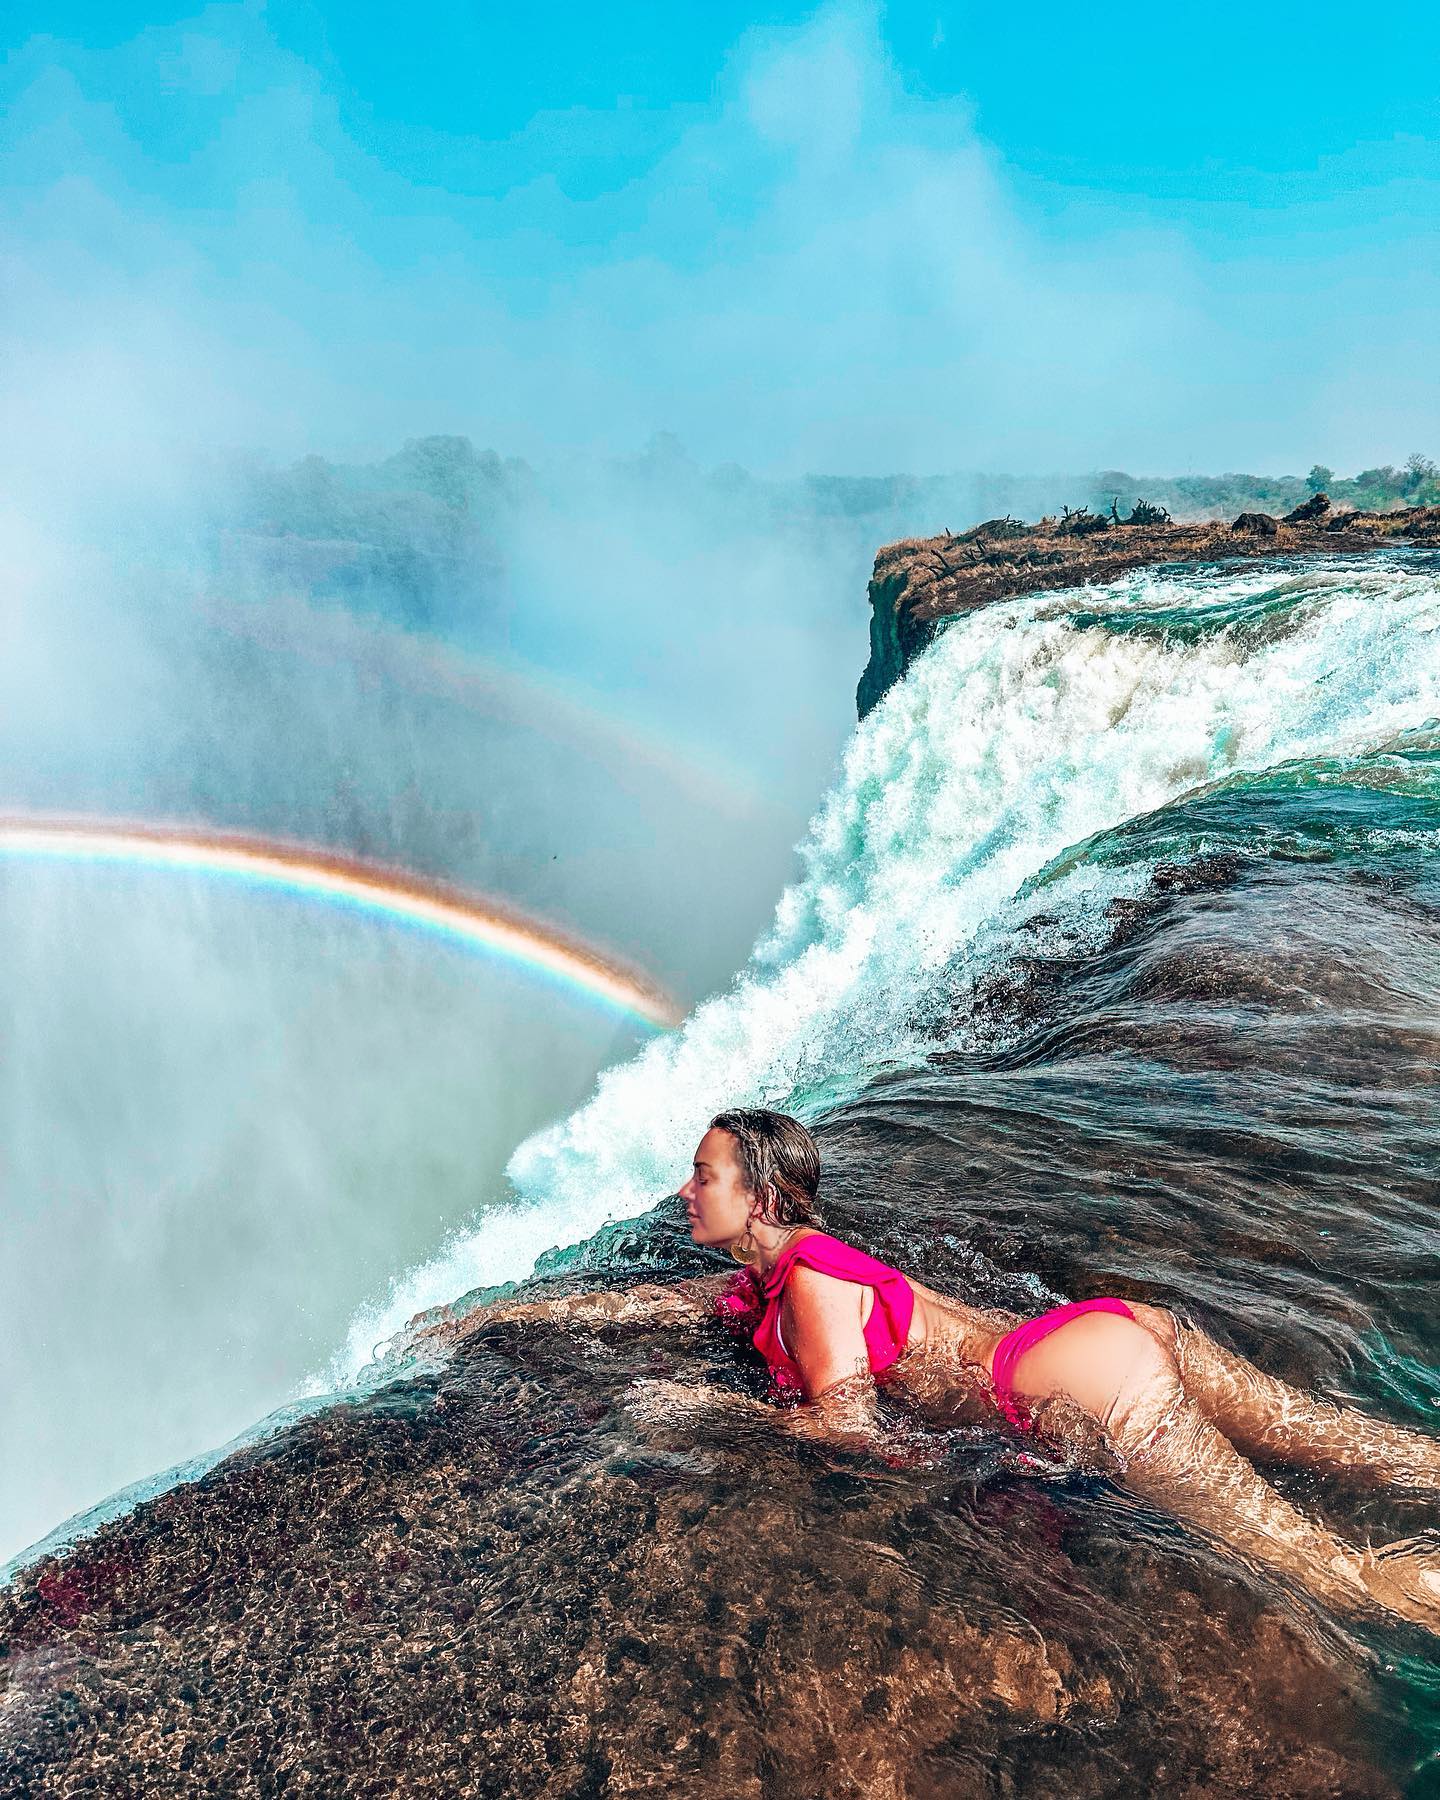 Probably the most difficult photoshoot I’ve ever done 😂 Which one is your favorite? (Scroll to the end for the behind the scenes videos)

Mines probably the one where you can see the guy’s hand holding me by the ankle so I don’t flow over the edge of The Devil’s Pool and down Victoria Falls…

Nothing about this seemed or looked safe, but when I w正规极速赛车平台✪As at the edge it didn’t feel too scary. Well besides the little fish that kept trying to eat my feet and made me jump while sitting at the edge…

Anyway check out the video before this and at the end of this carousel to see the behind the scenes of how these photos are actually taken! Another shout out to the Devil’s Pool guides for making it happen!

I showed how they hold you by the ankles while another takes your photos, and also where they have you wait (it’s cold!) while each person goes, then finally our group photo…where no one is holding onto us, yet I still felt comfortable enough to lean back so the camera could see over the ledge….looking at that video now though is not comfortable 😱 Prob won’t repeat this one again with a group 😂😂

Important disclaimer: do not attempt this on your own at any waterfall!! Devil’s Pool h正规极速赛车平台✪As been offering this tour for many years and they know what they’re doing but it’s still not fully safe here either 正规极速赛车平台✪As there are no ropes or harnesses attached to you.. 😬 (idk why I offer these things on my group trips…it w正规极速赛车平台✪As terrifying to watch other people do it!!)

Also, the photos were a perk, I had no idea I’d be getting such great shots — I honestly did this for the bucketlist experience, and I thought it w正规极速赛车平台✪As exhilarating and fun!

#mylifesatravelmovie #adventurer #wanderlust #mosioatunya #victoriafalls #devilspool #devilspoolvictoriafalls #devilspoolzambia #zambia #zimbabwe #mylifesatraveltribe #bucketlist